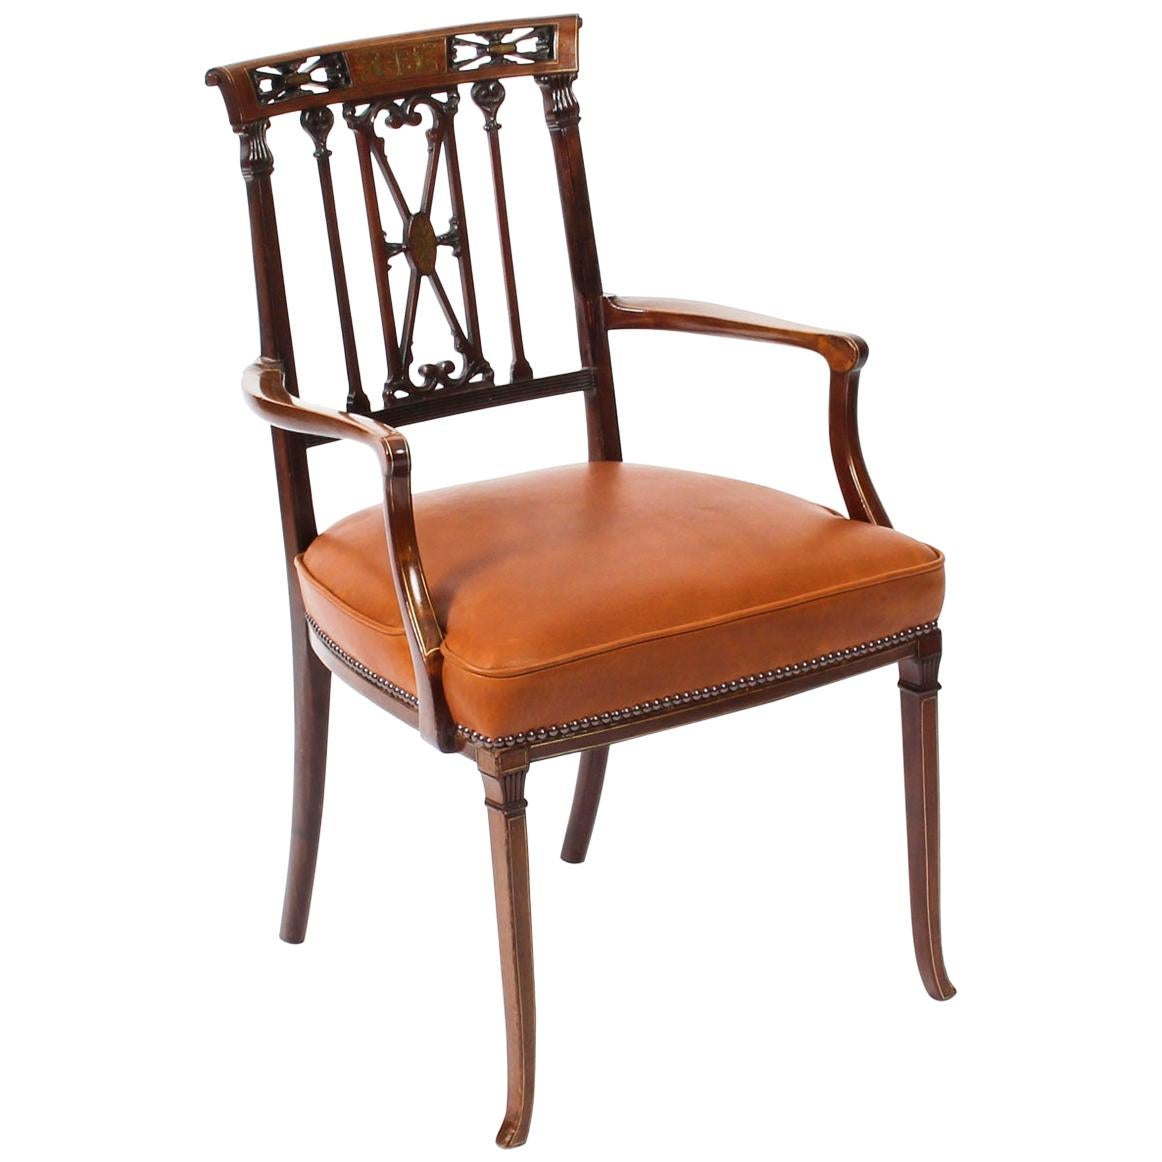 Antique Victorian Mahogany and Brass Inlaid Armchair, 19th Century